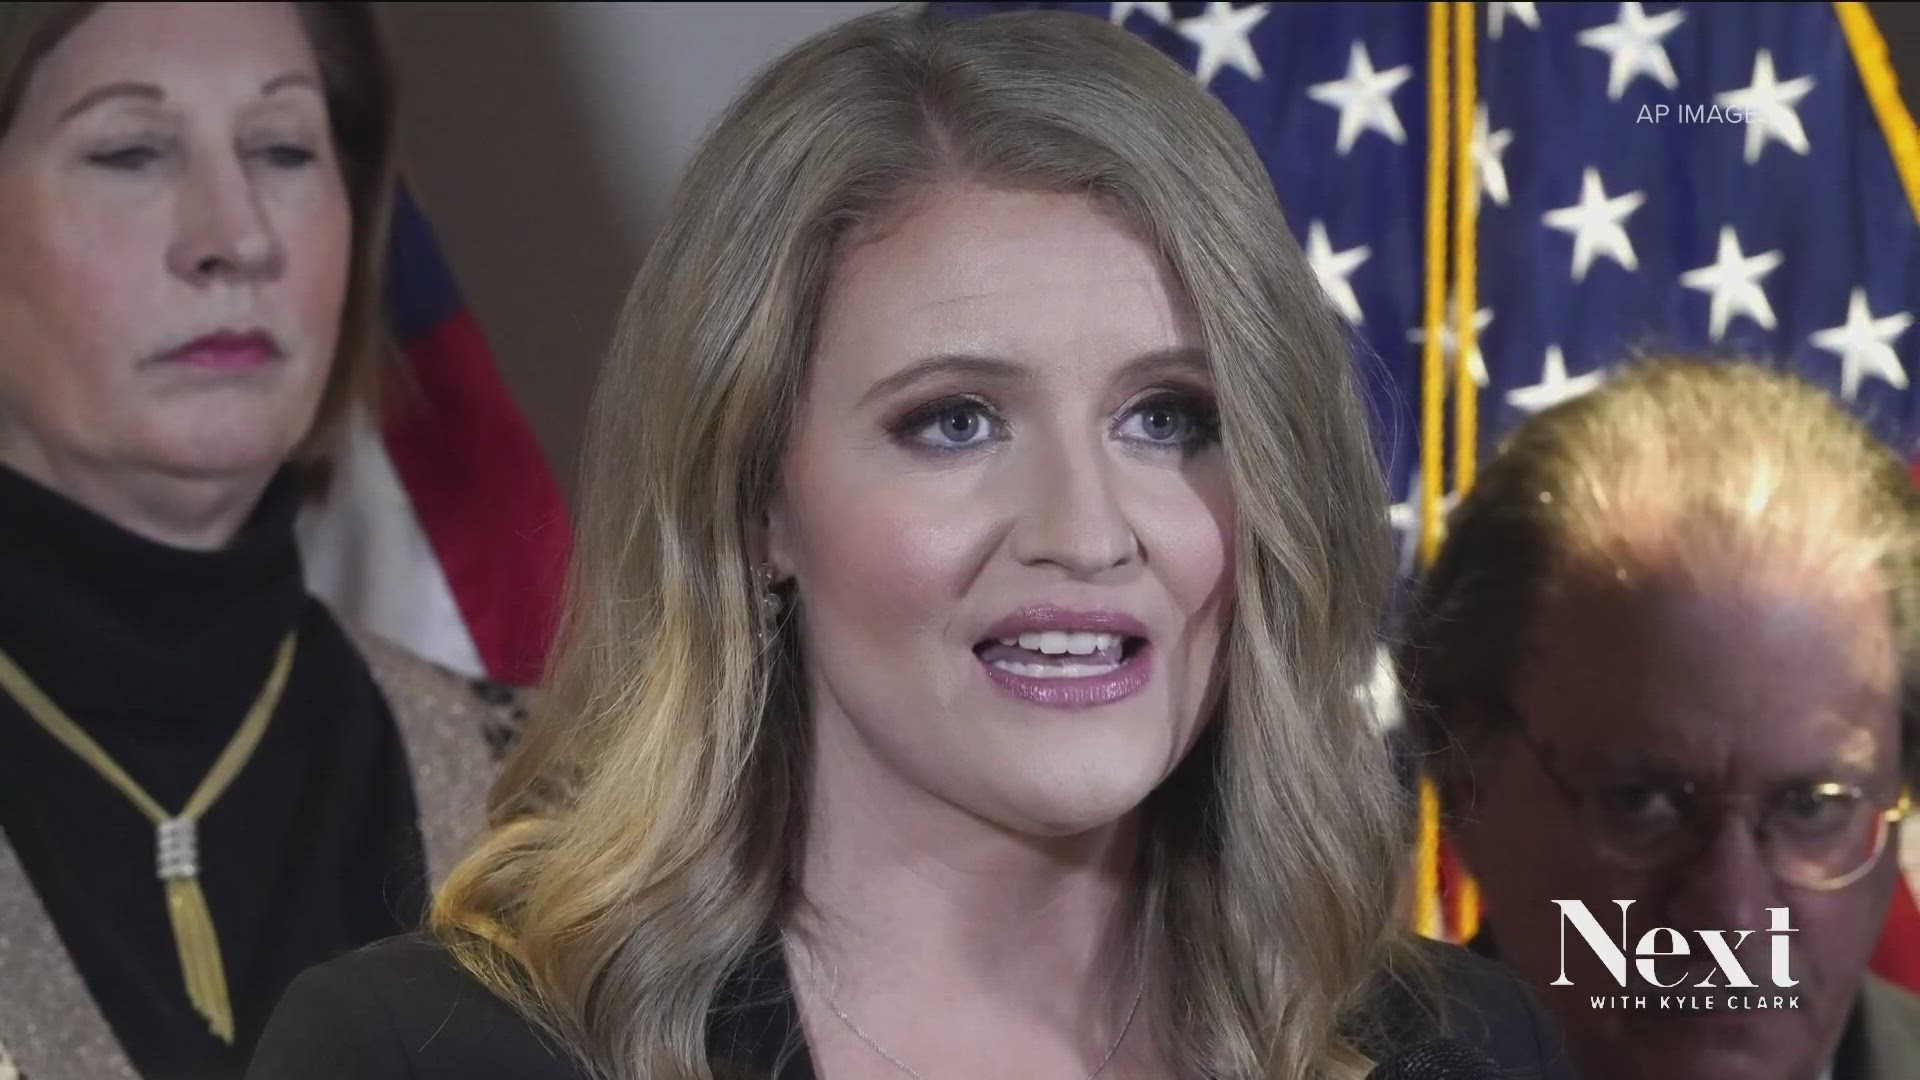 Coloradan and former Trump attorney Jenna Ellis has been censured by a judge and admitted to "misrepresentations" involving election rigging conspiracies.